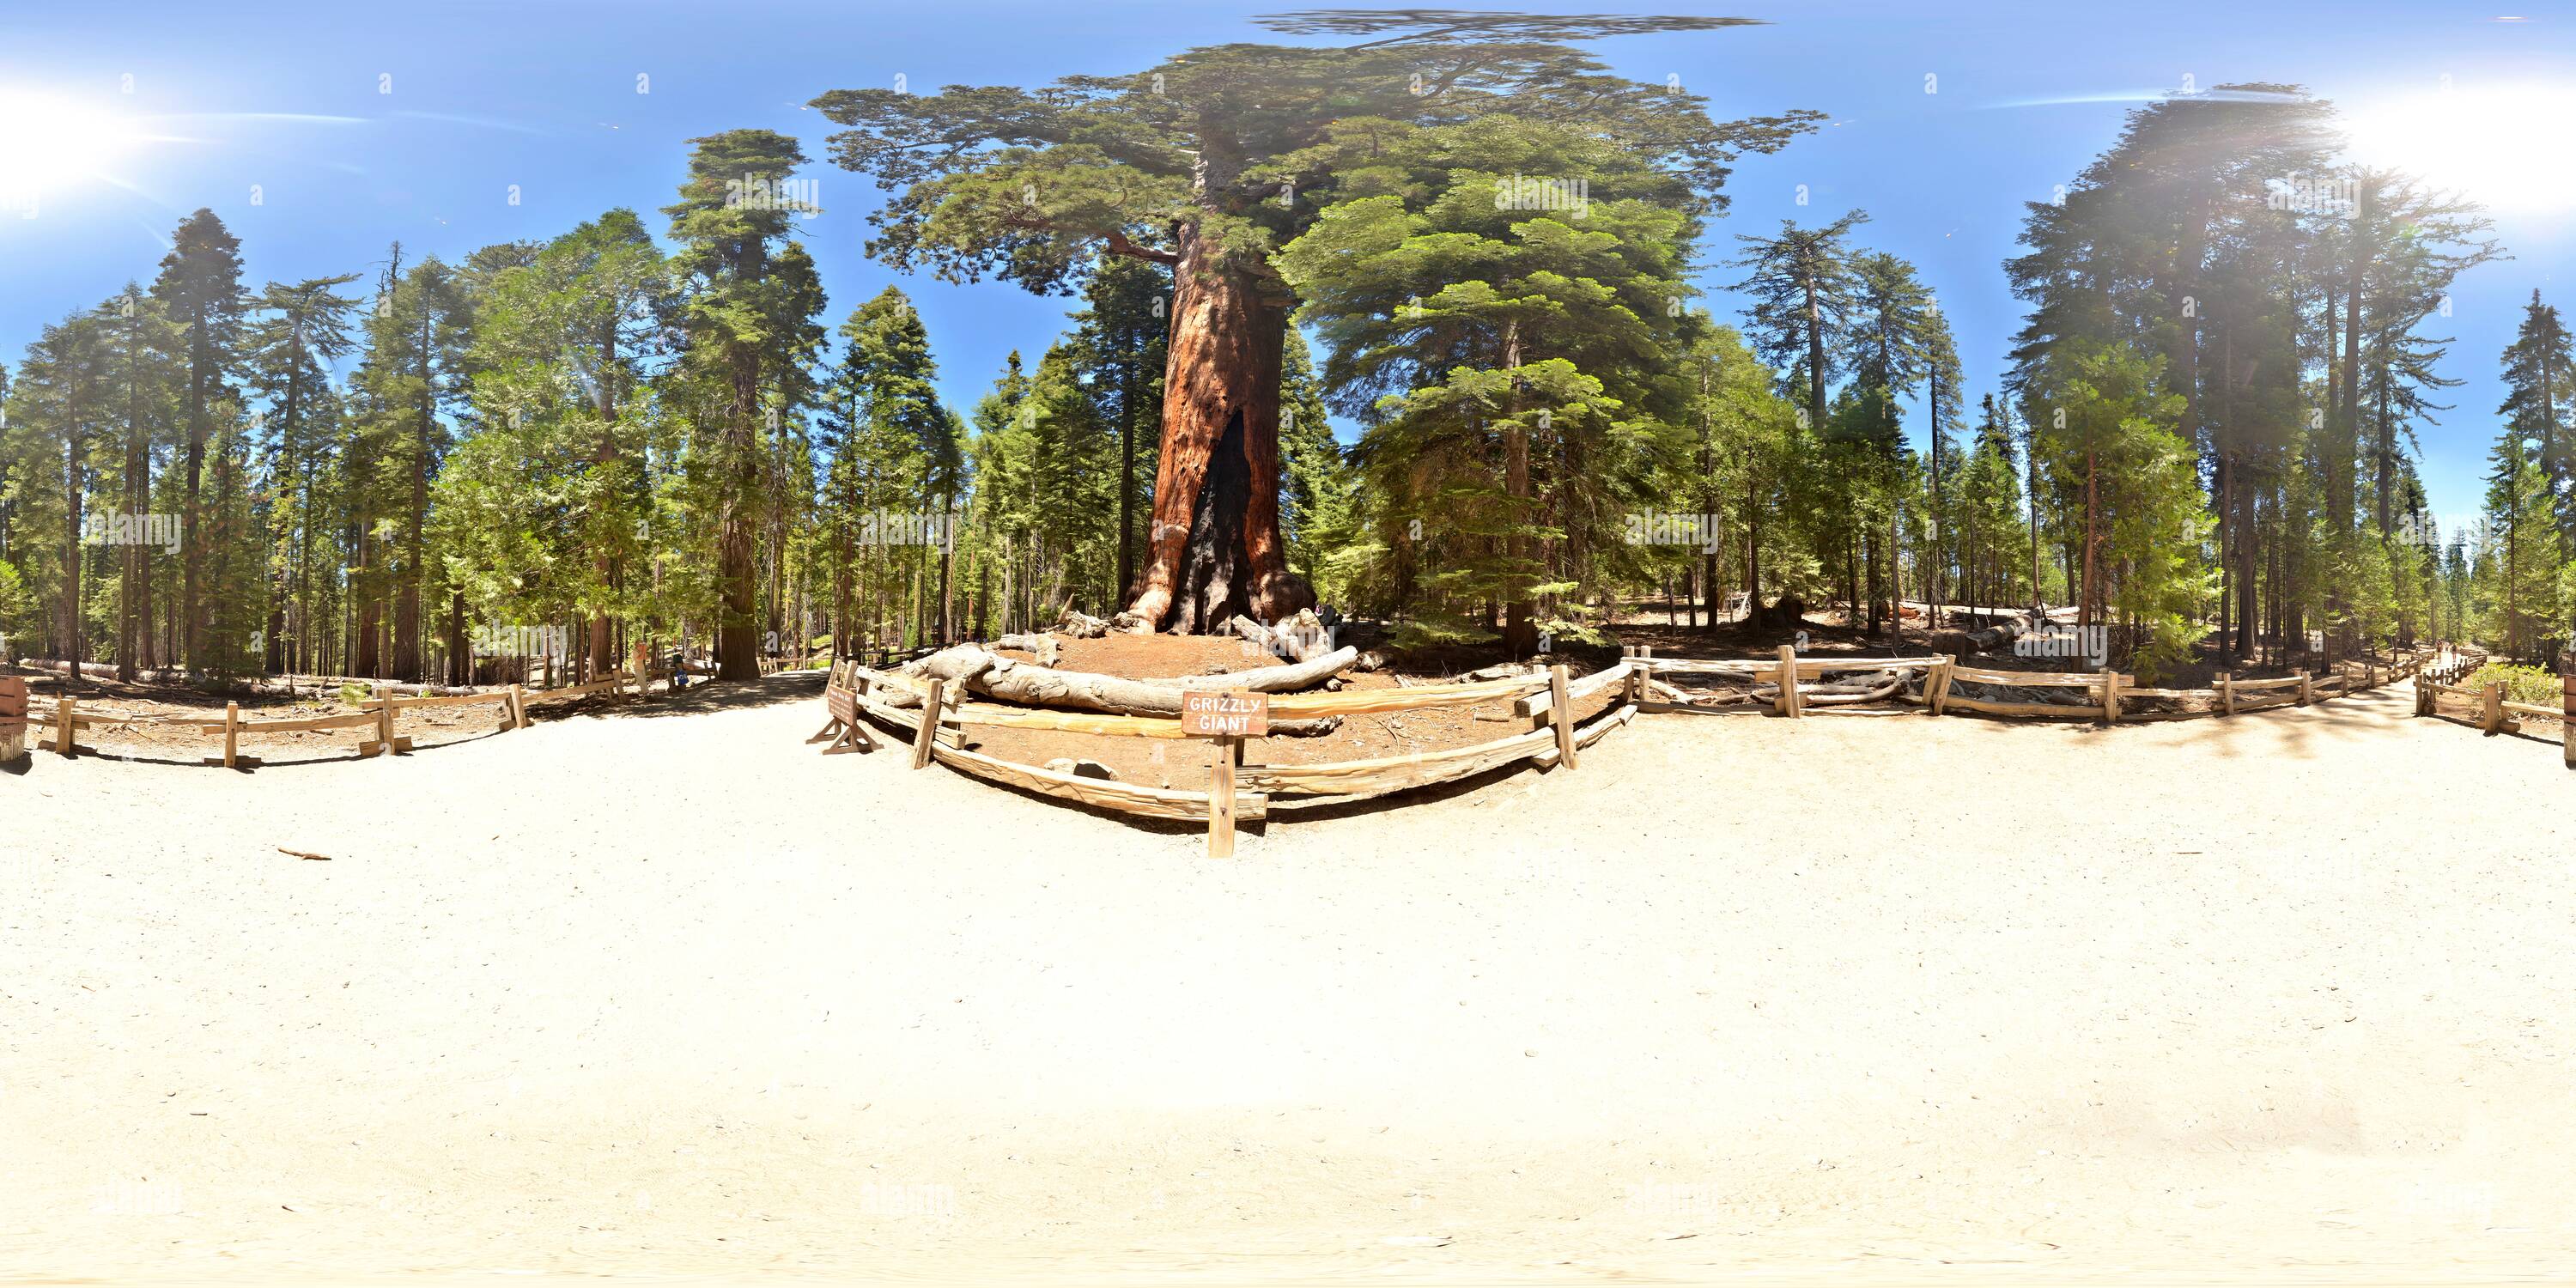 360 degree panoramic view of Giant Grizzly Sequoia Tree overlook, Yosemite